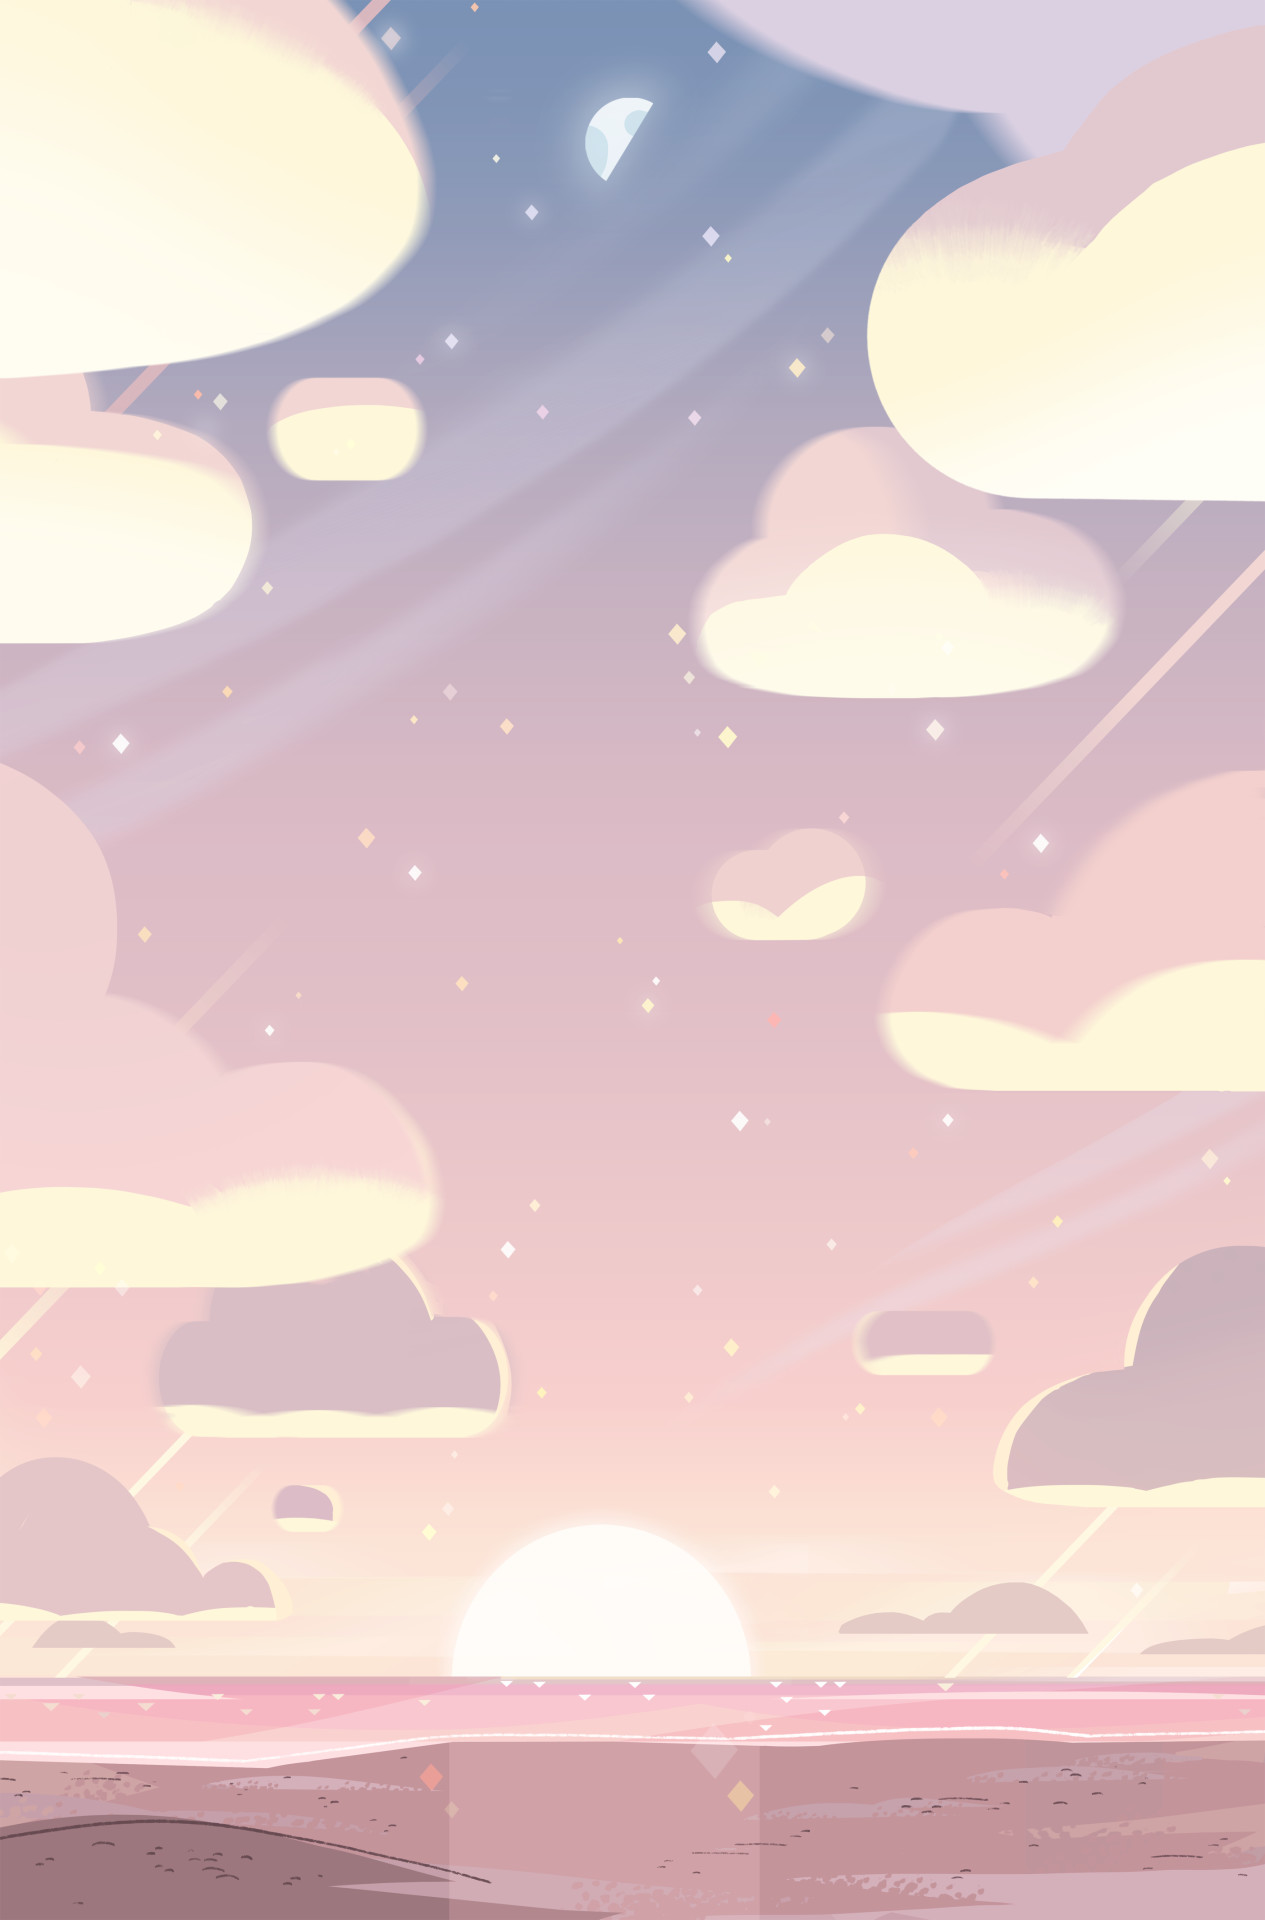 1265x1920 Steven Crewniverse Behind-The-Scenes Universe: A selection of Backgrounds  from the Steven